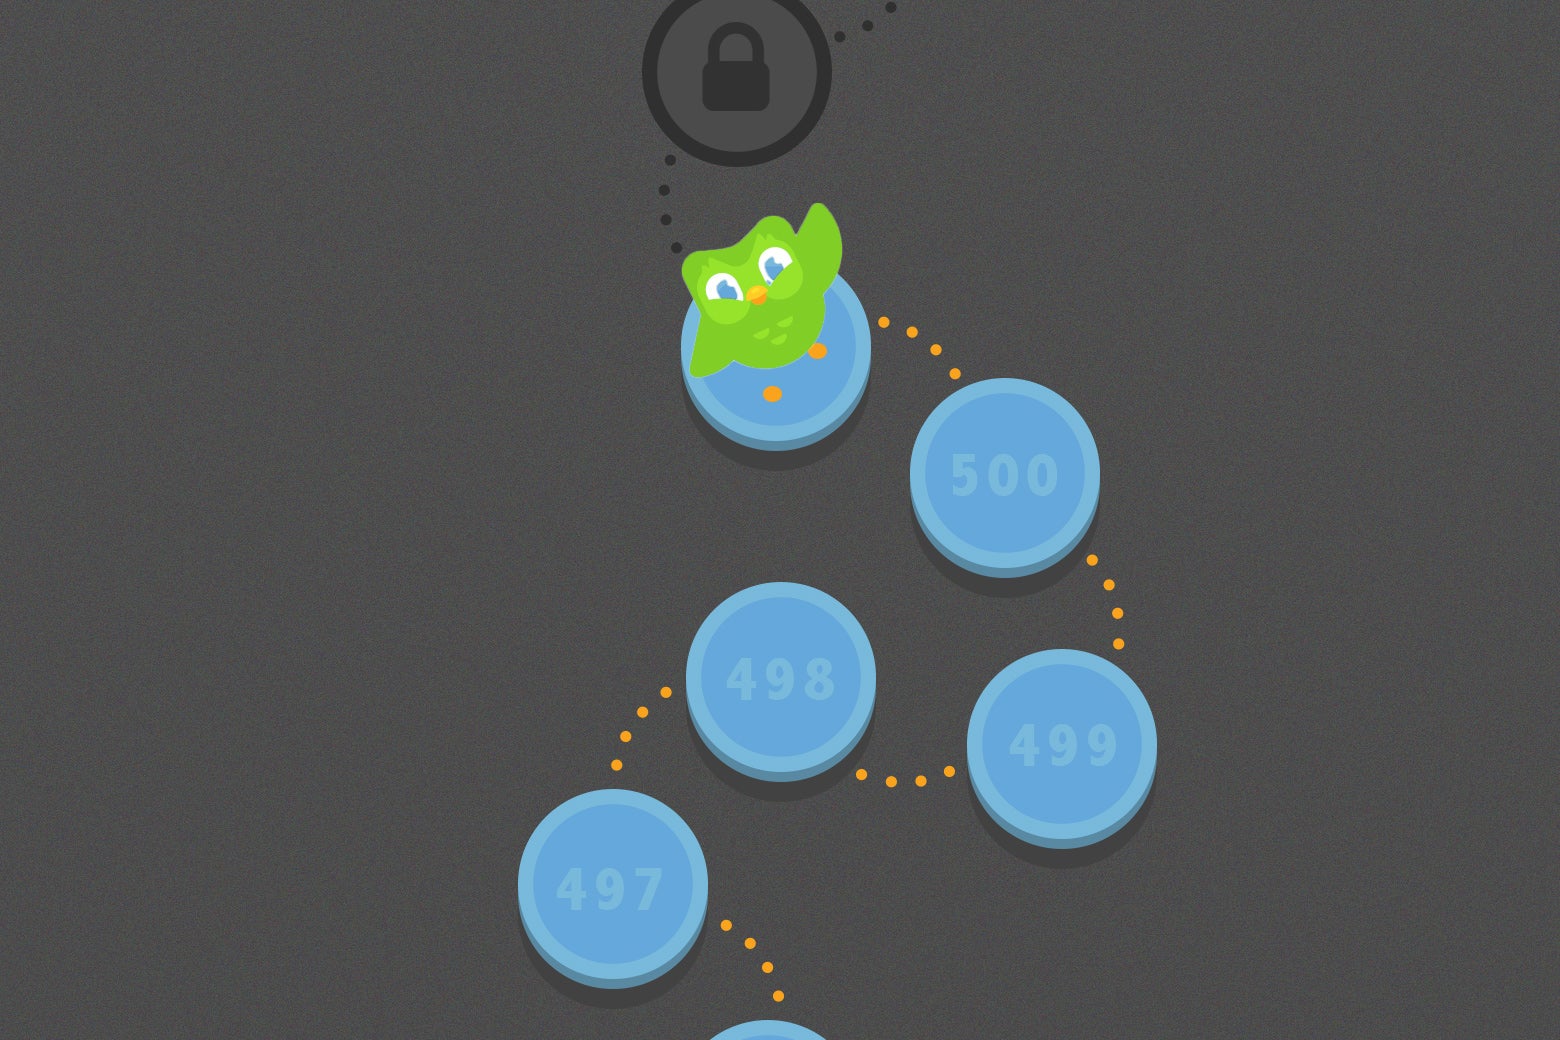 The Duolingo owl hops from bubbles containing the streak: 497 to 498, up to 501. A grayed-out bubble with a lock signals a still-to-be-attained Duo level.